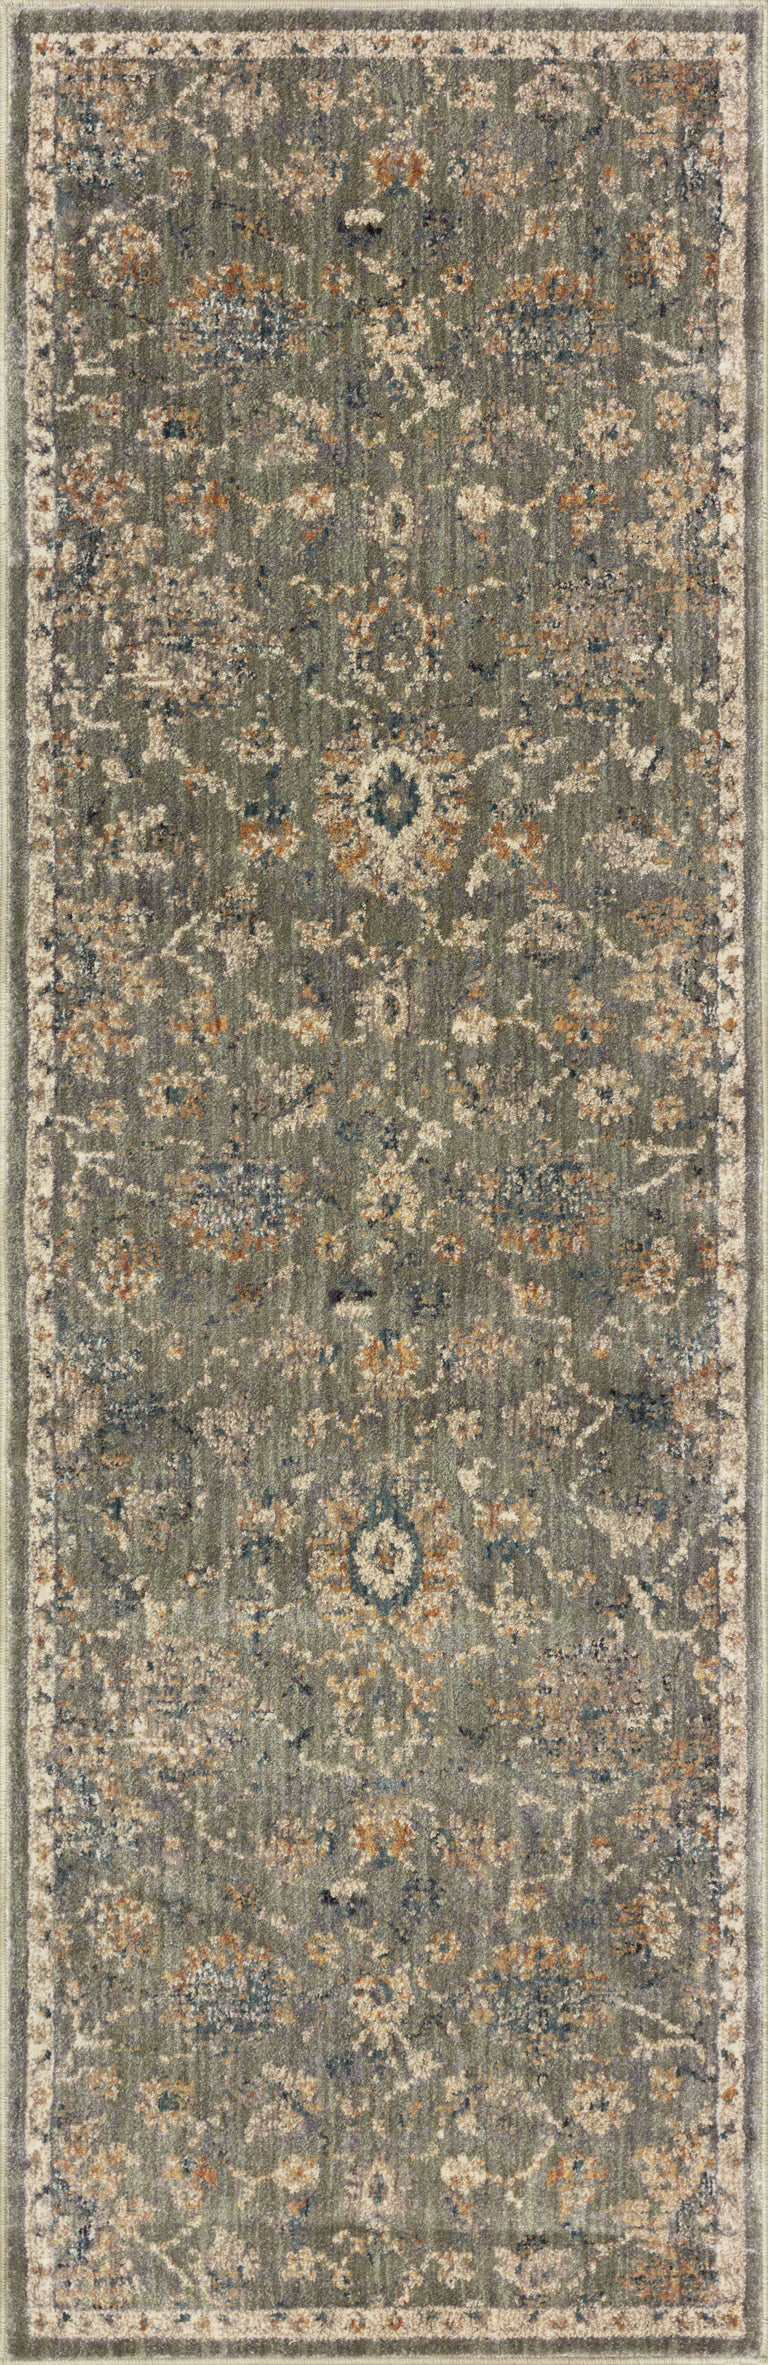 Loloi Rugs Giada Collection Rug in Sage, Gold - 6'3" x 9'